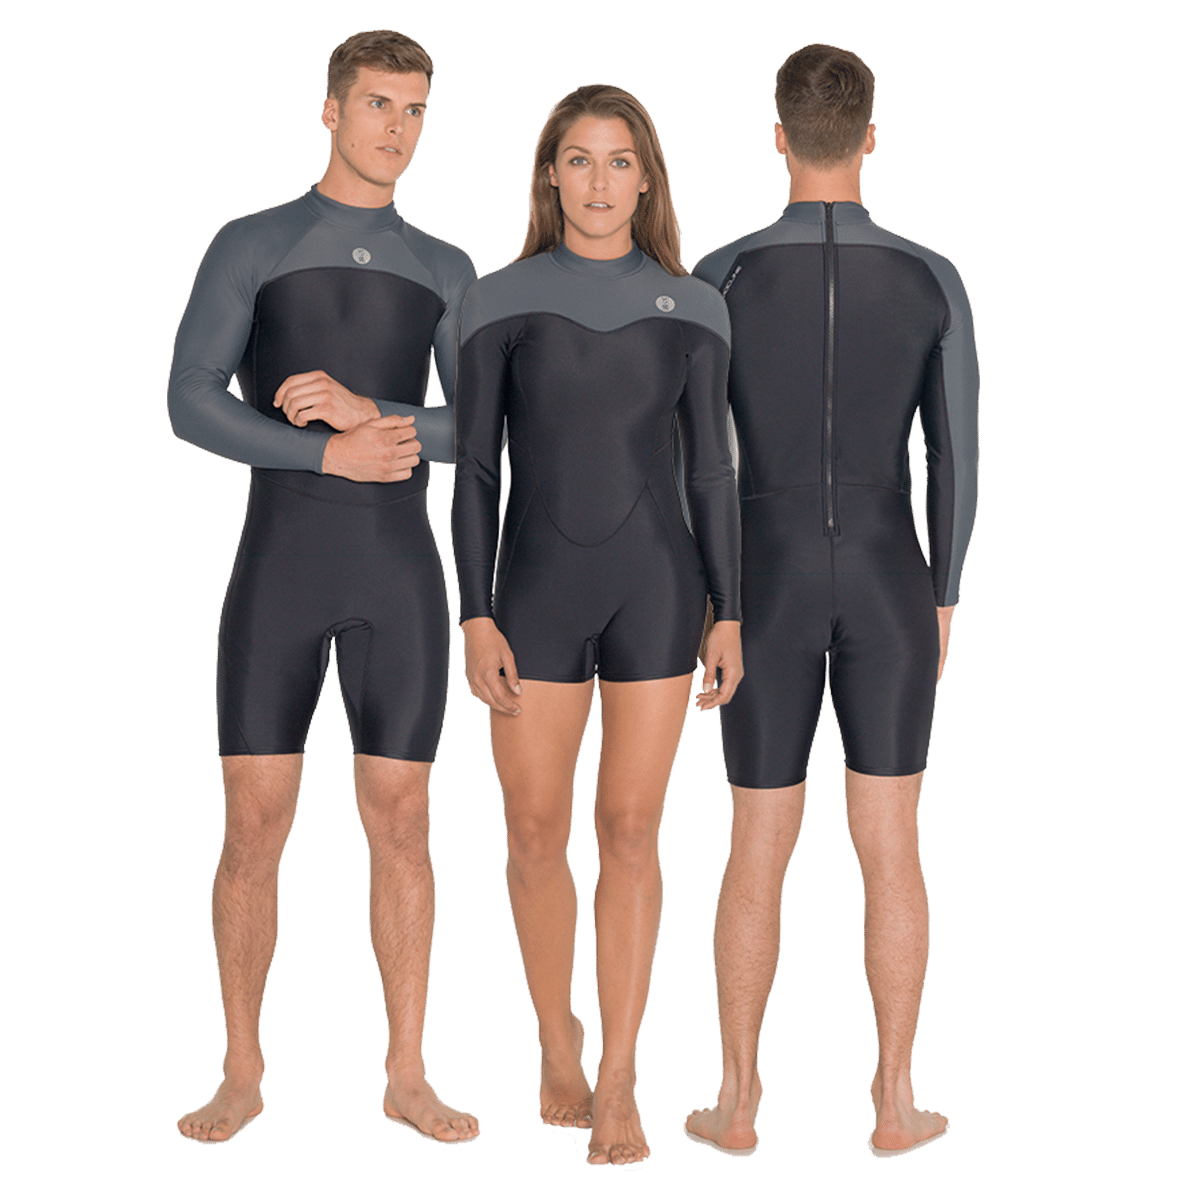 Thermocline Spring Suit (Women XL) - Discontinued